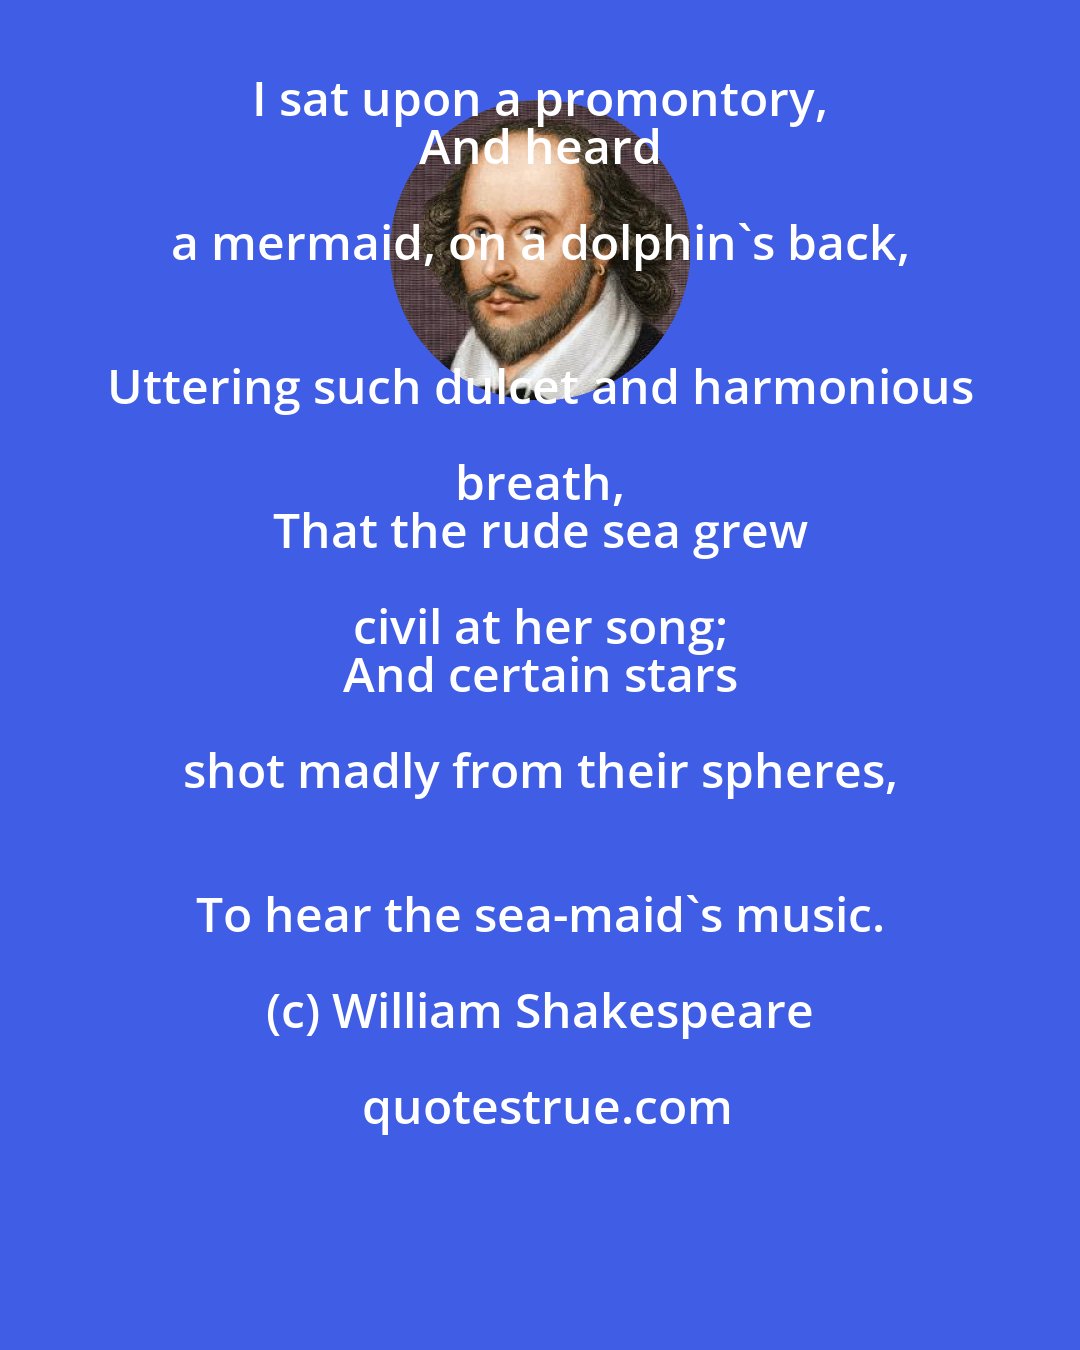 William Shakespeare: I sat upon a promontory, 
 And heard a mermaid, on a dolphin's back, 
 Uttering such dulcet and harmonious breath, 
 That the rude sea grew civil at her song; 
 And certain stars shot madly from their spheres, 
 To hear the sea-maid's music.